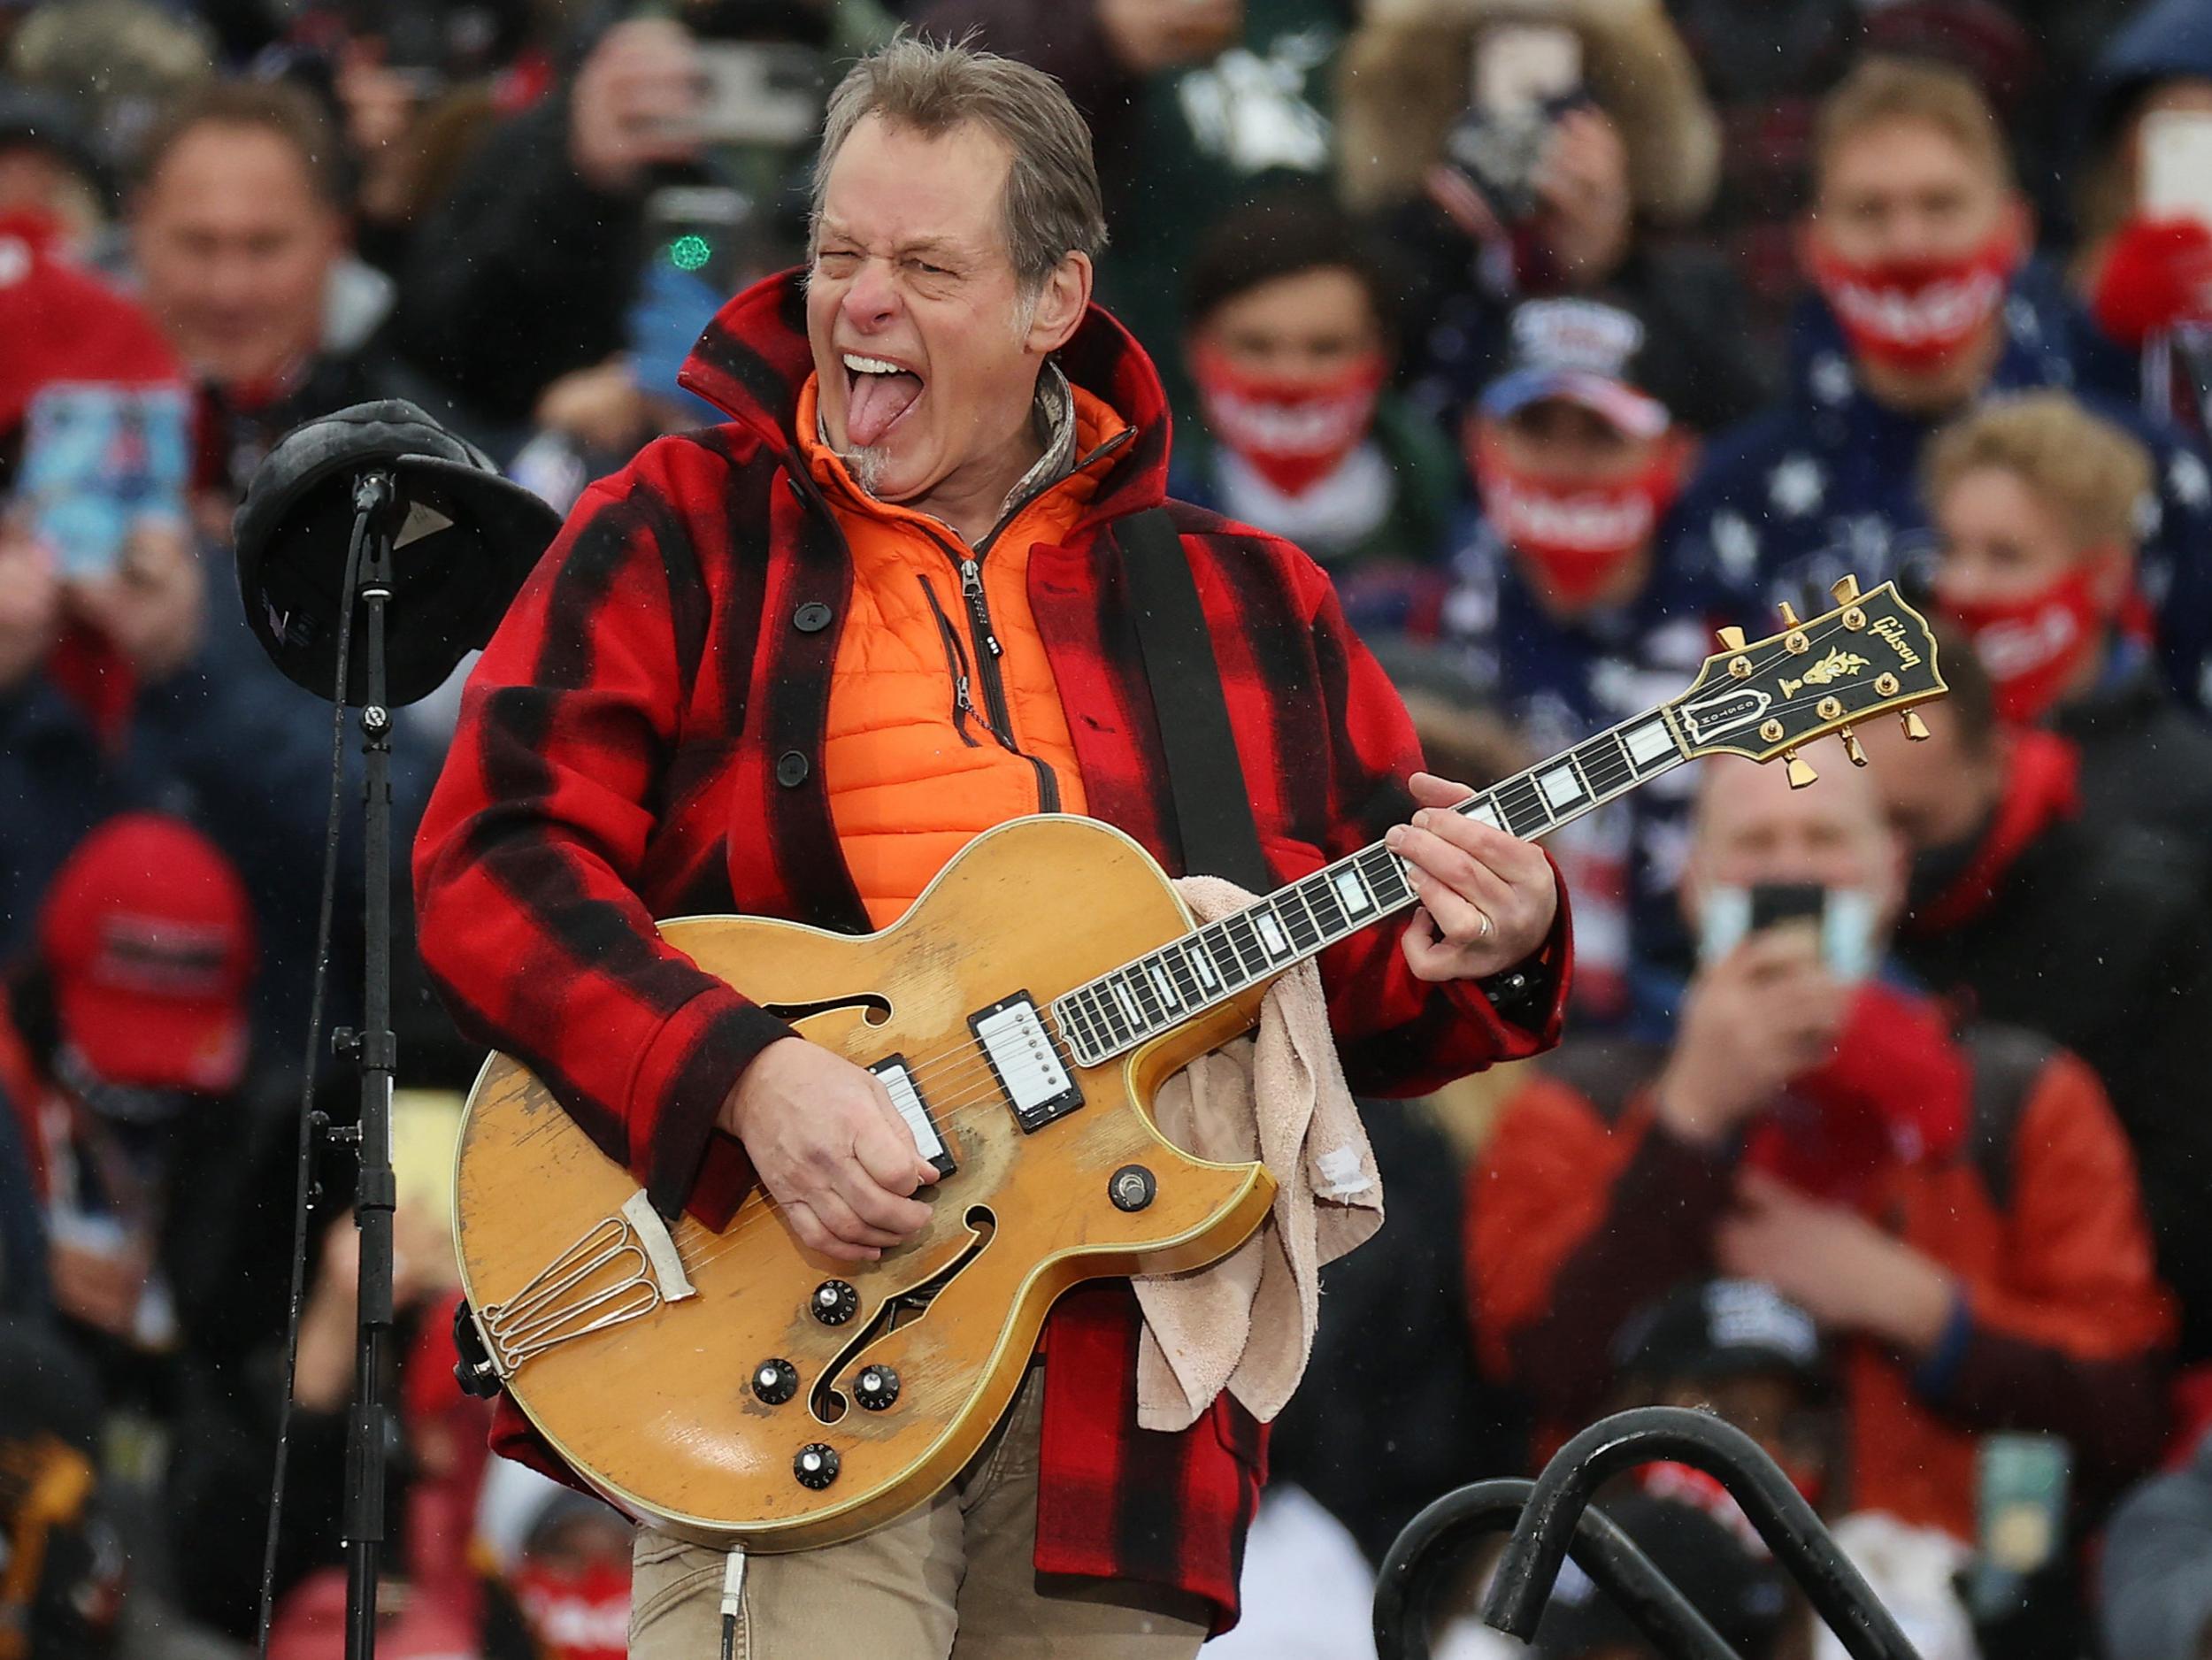 Ted Nugent performs ‘The Star-Spangled Banner’ during a Trump campaign rally in Lansing, Michigan (Ge